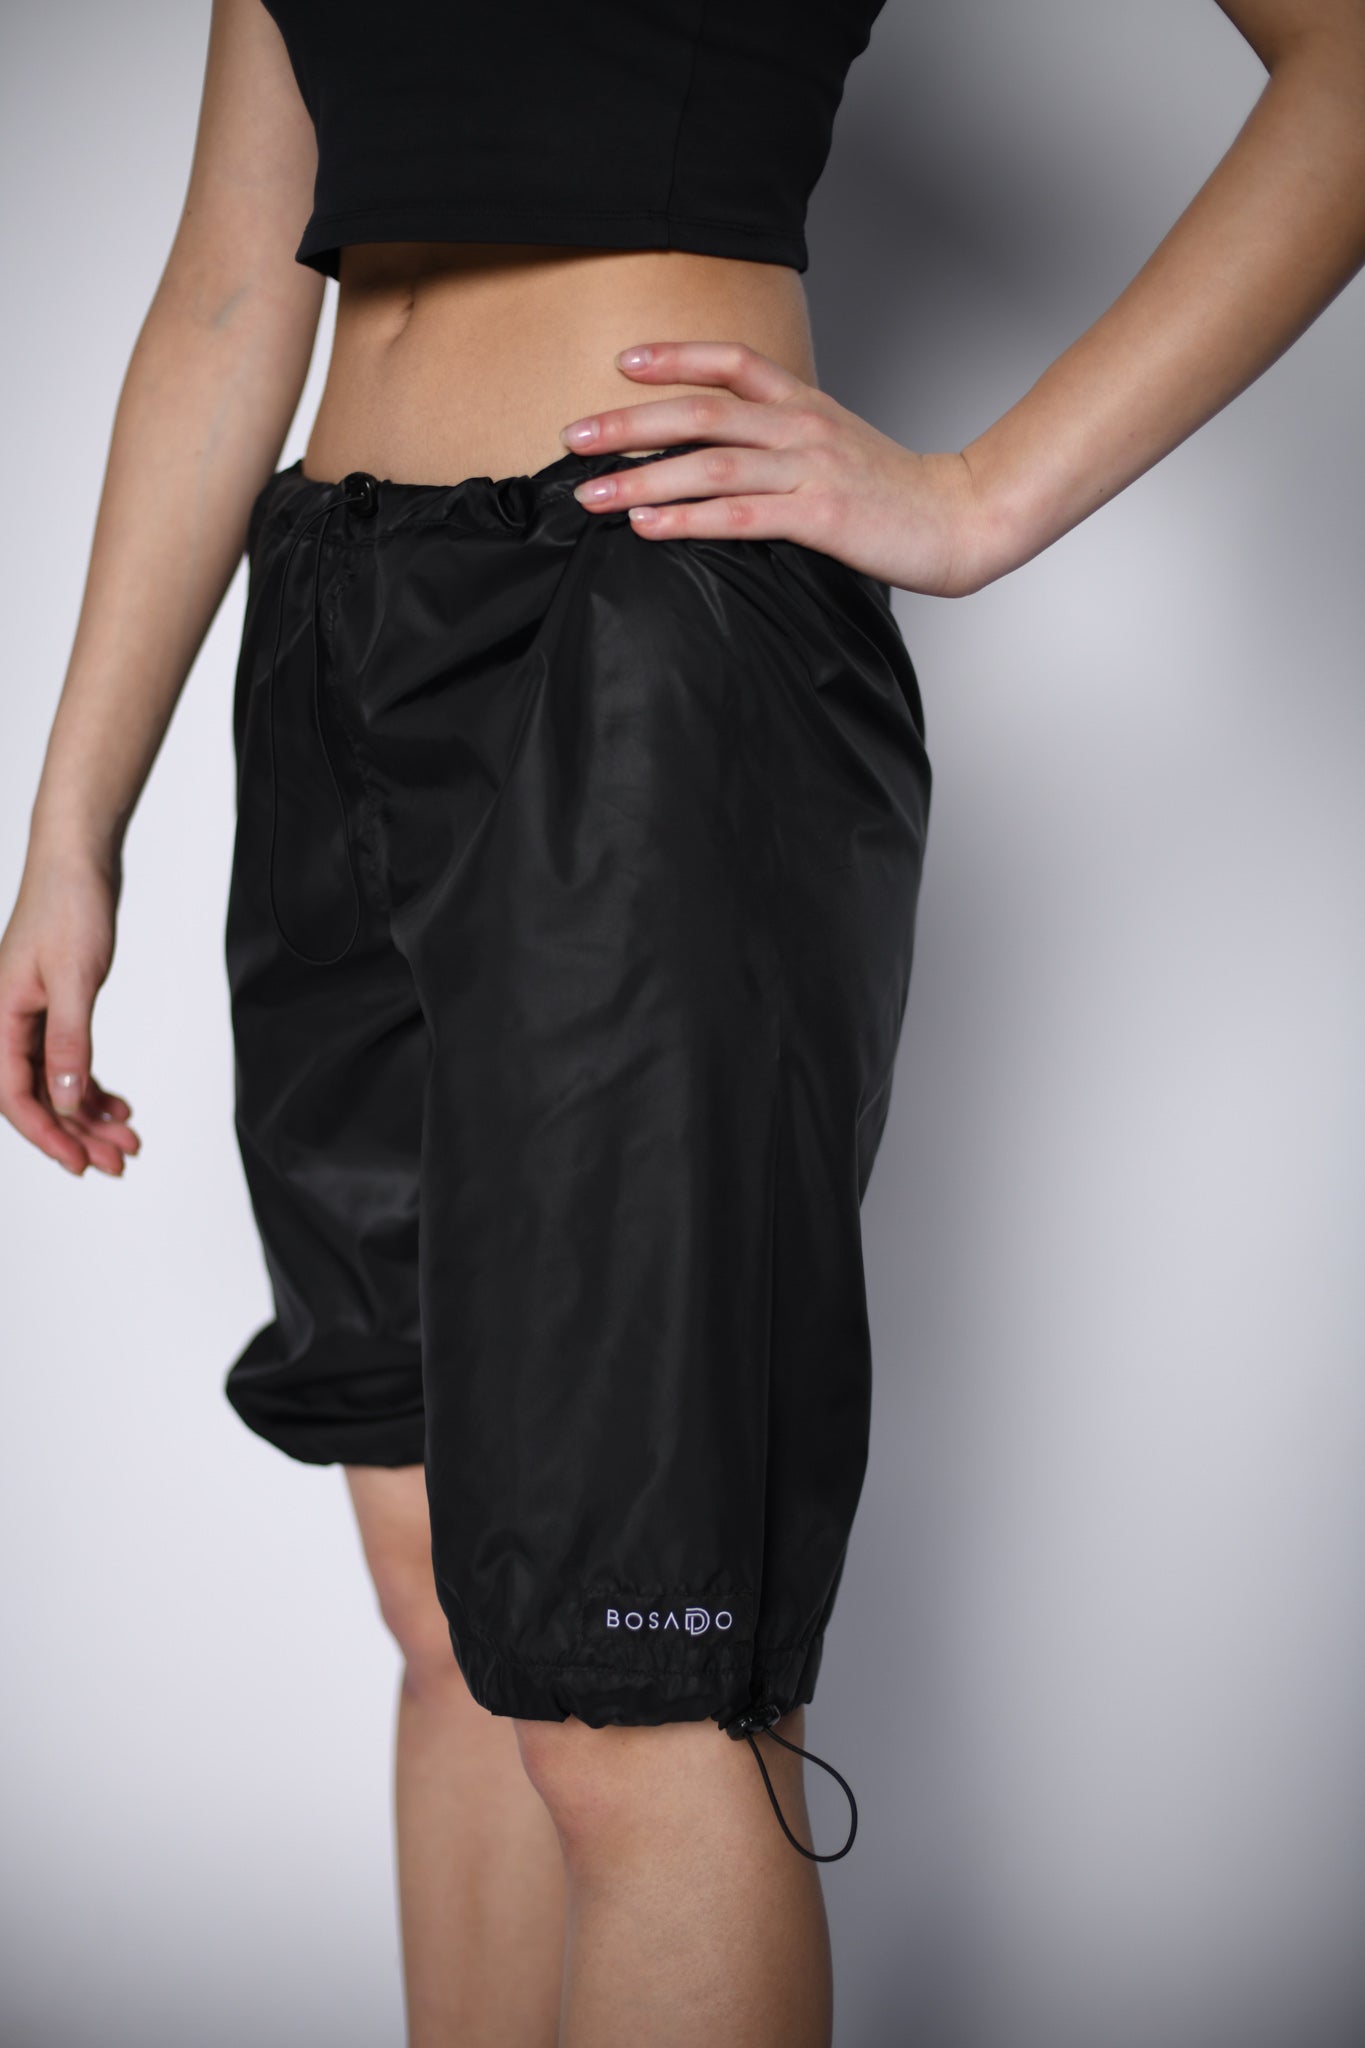 NEW URBAN SWAN COLLECTION S/S 23 | Black pearl long shorts